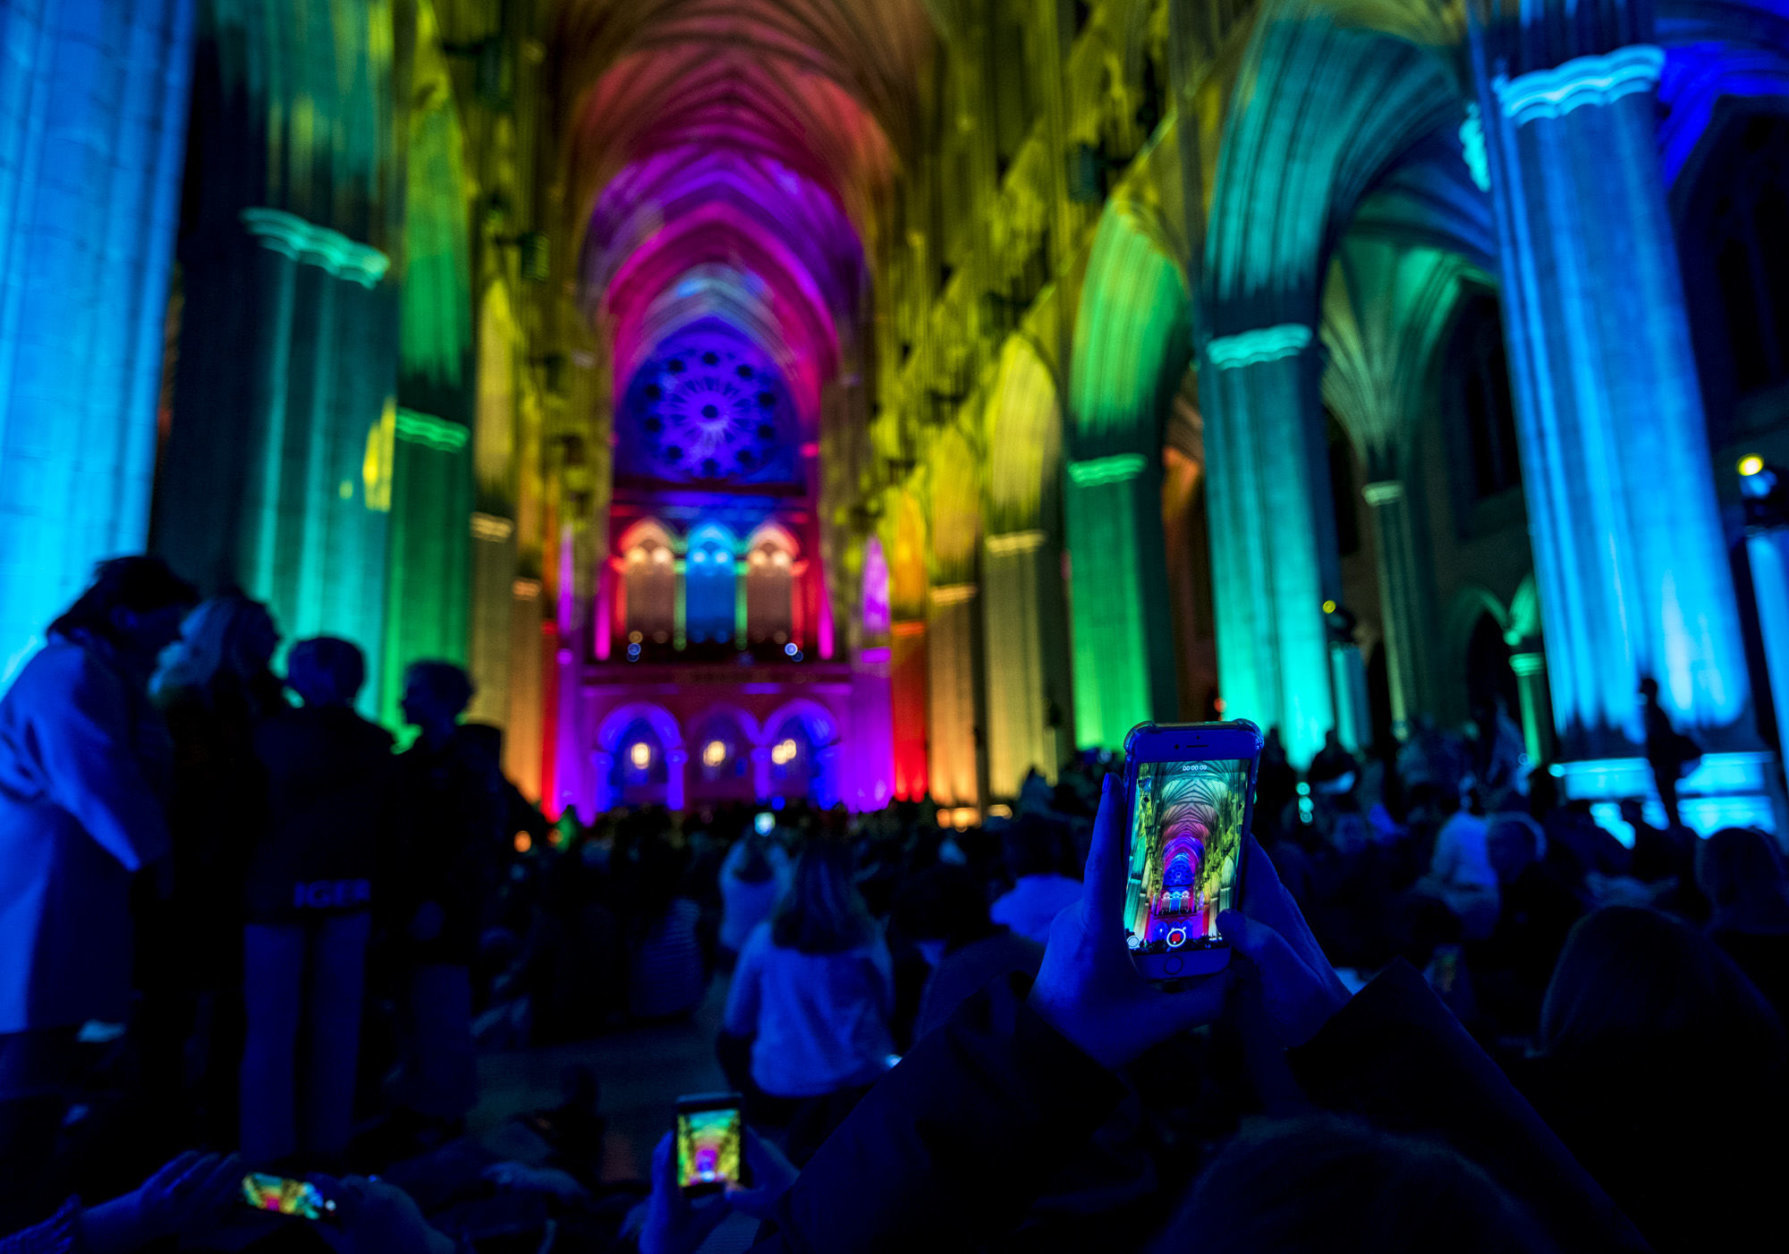 As part of "Space, Light and Sound" visitors Monday night were allowed to wander through the cathedral's vast gothic interior. (Courtesy Washington National Cathedral/Danielle E. Thomas)